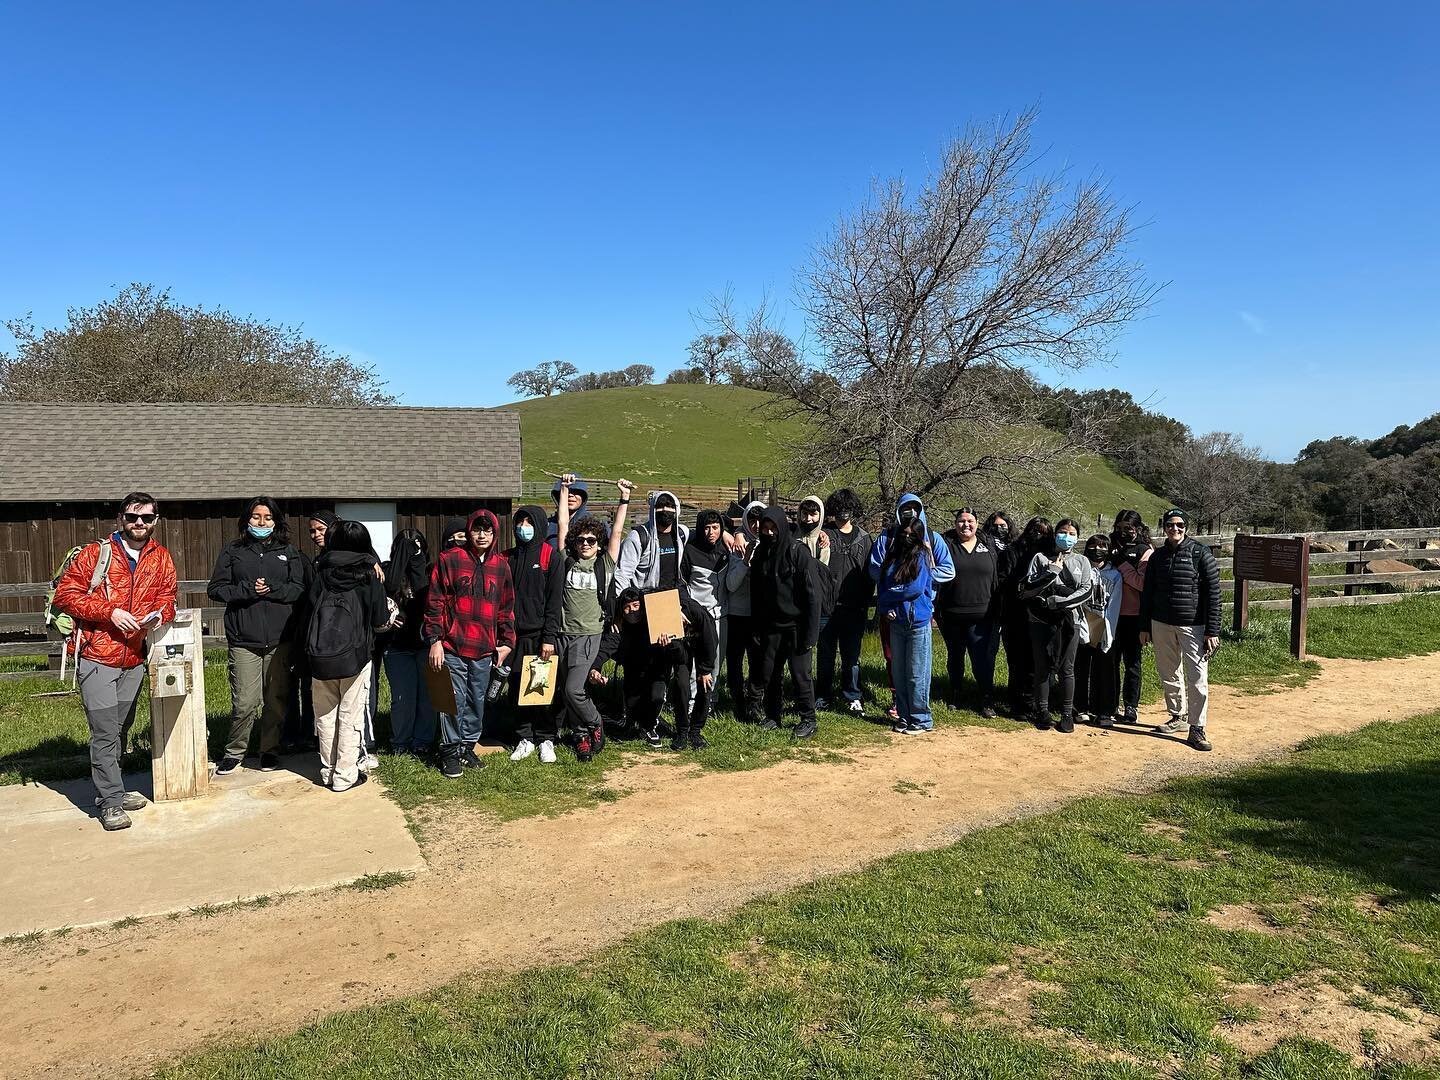 Today our amazing 8th grades got the opportunity to hike 5.6 miles around Morgan Territory Regional Preserve! 🥾🌳🌲⛰️

These nature enthusiasts got to soak in some sun and Mother Nature!

#LifeAcademy #Healthy4Life